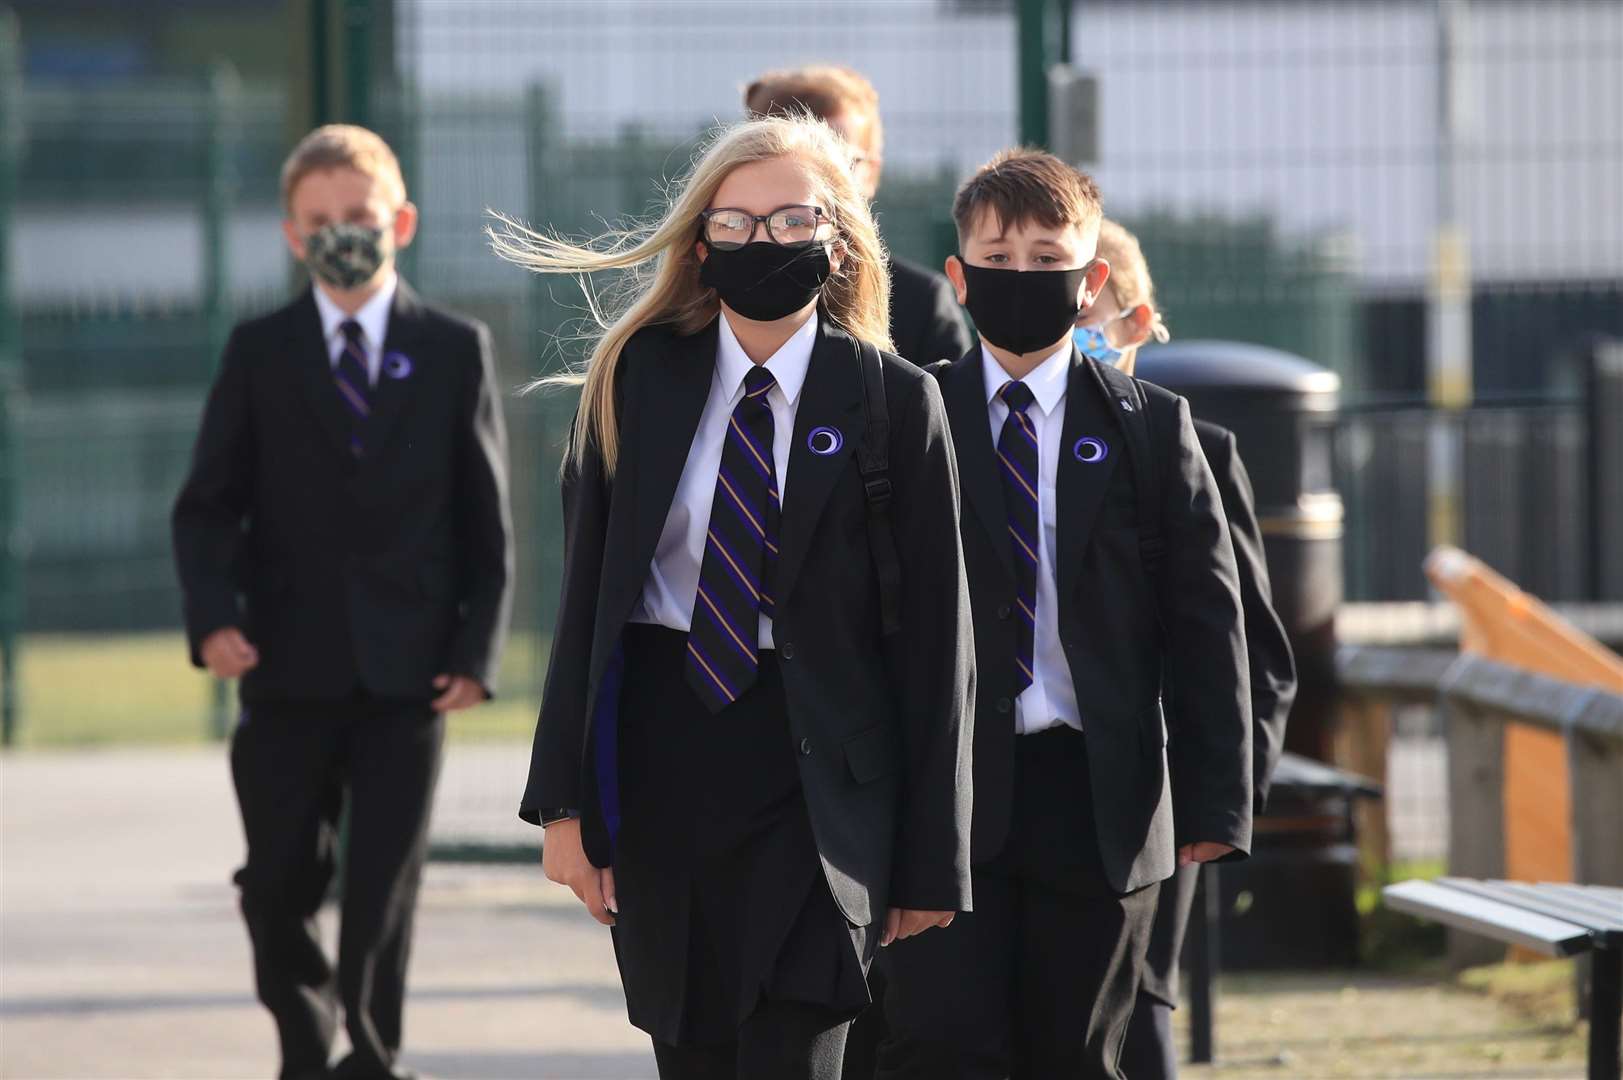 Children from Year 7 upwards are wearing face masks in communal areas